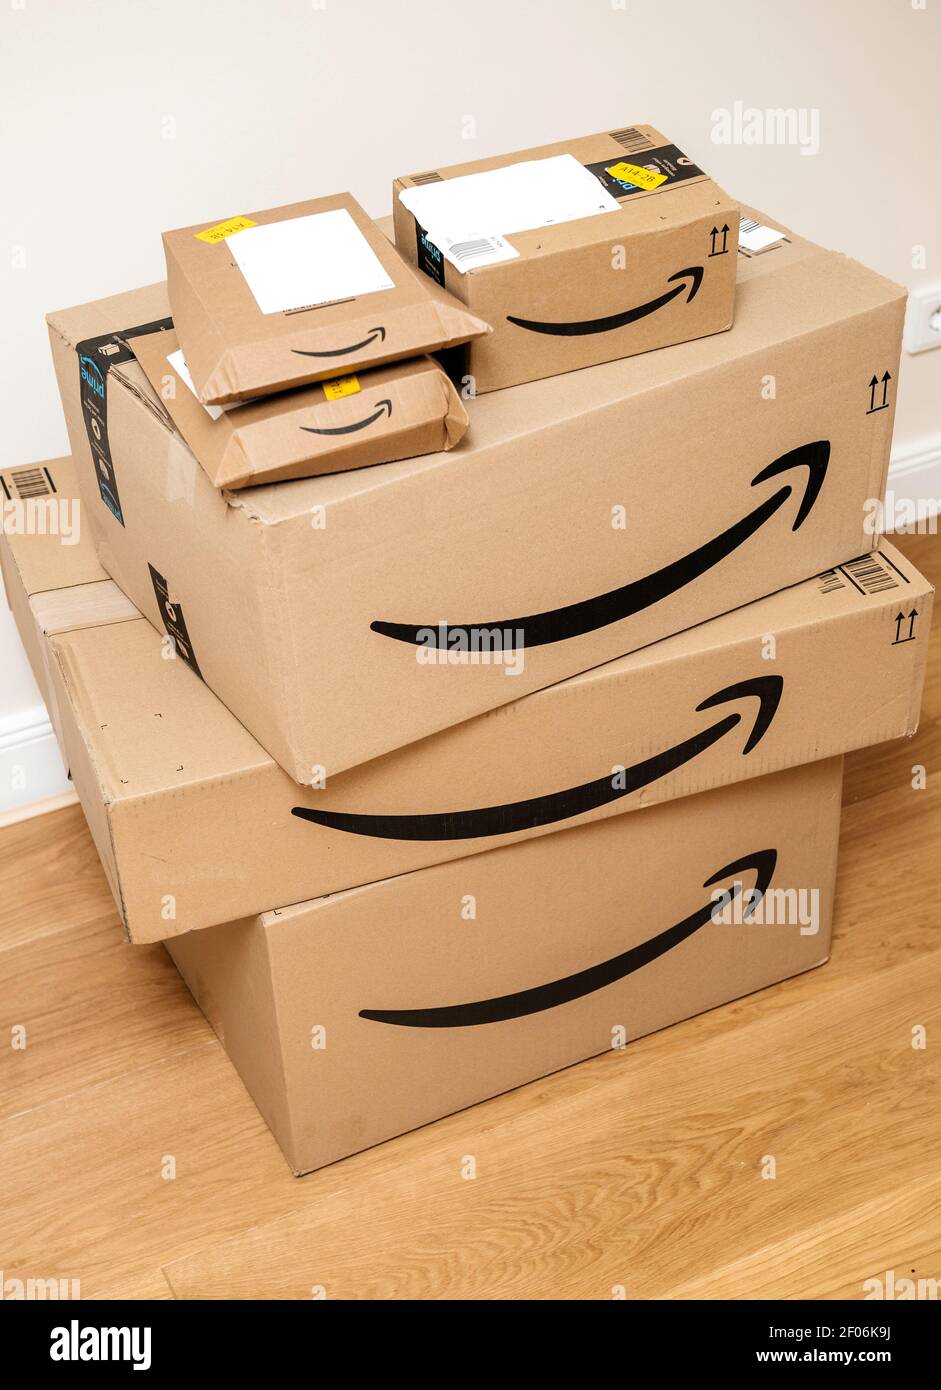 Amazon Box From Above High Resolution Stock Photography and Images - Alamy